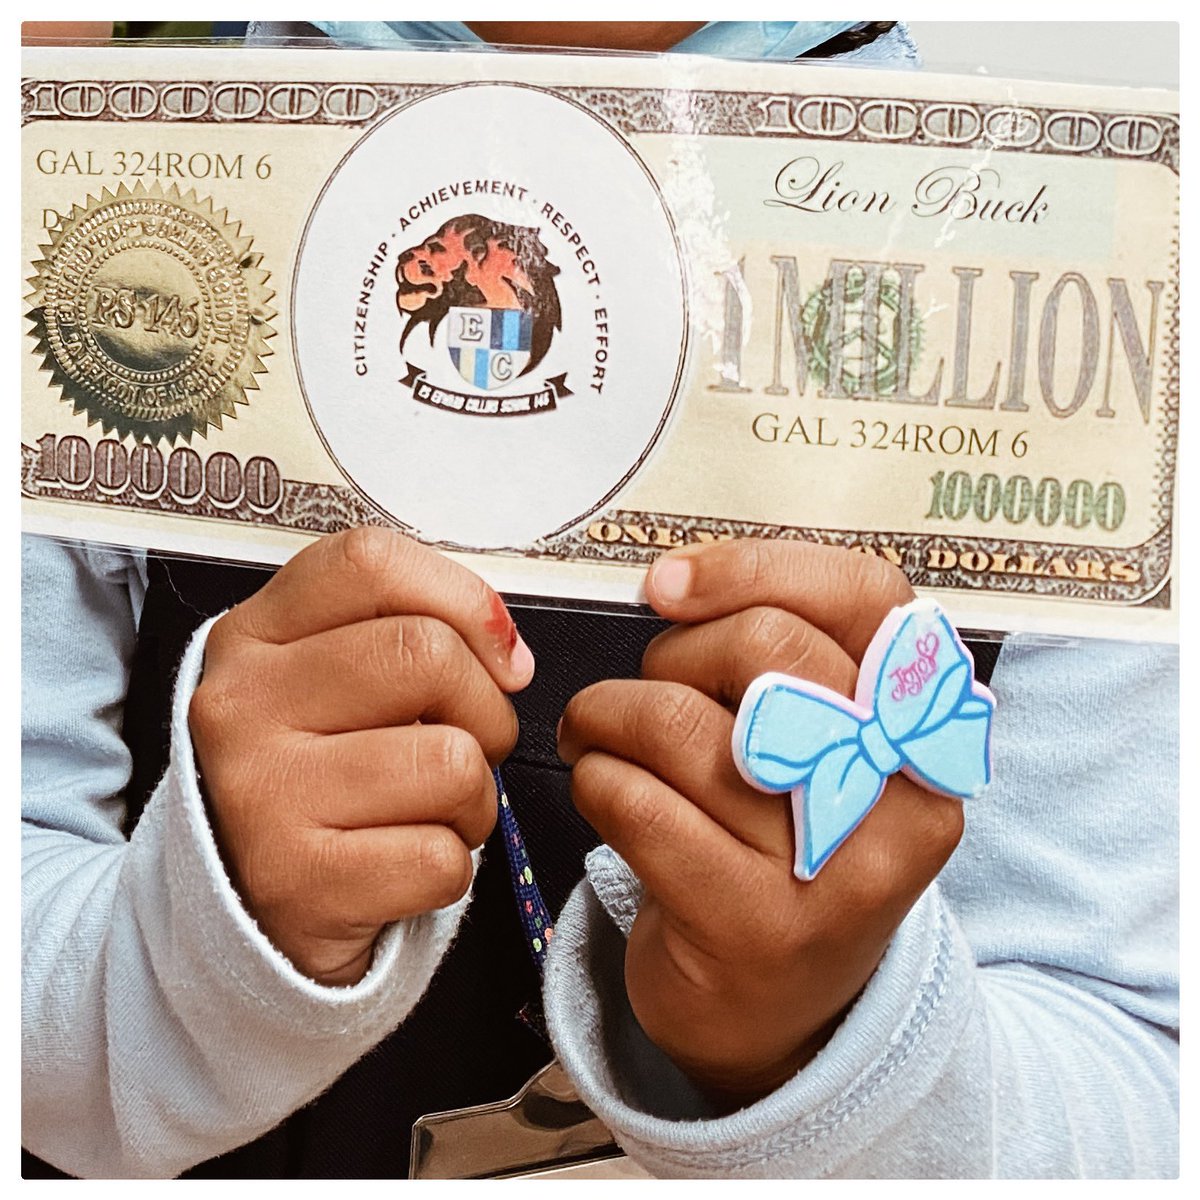 Perfect Attendance for the week? The Bank of PS146 automatically enrolls you in the Monthly Million Dollar Monday lottery! GOTTA BE IN IT TO WIN IT! #perfectattendance #ps146x #district8 #pbis @jen_joynt @NYCMayor @DOEChancellor @BxSuptTobia @CECD8Bronx @NYCSchools